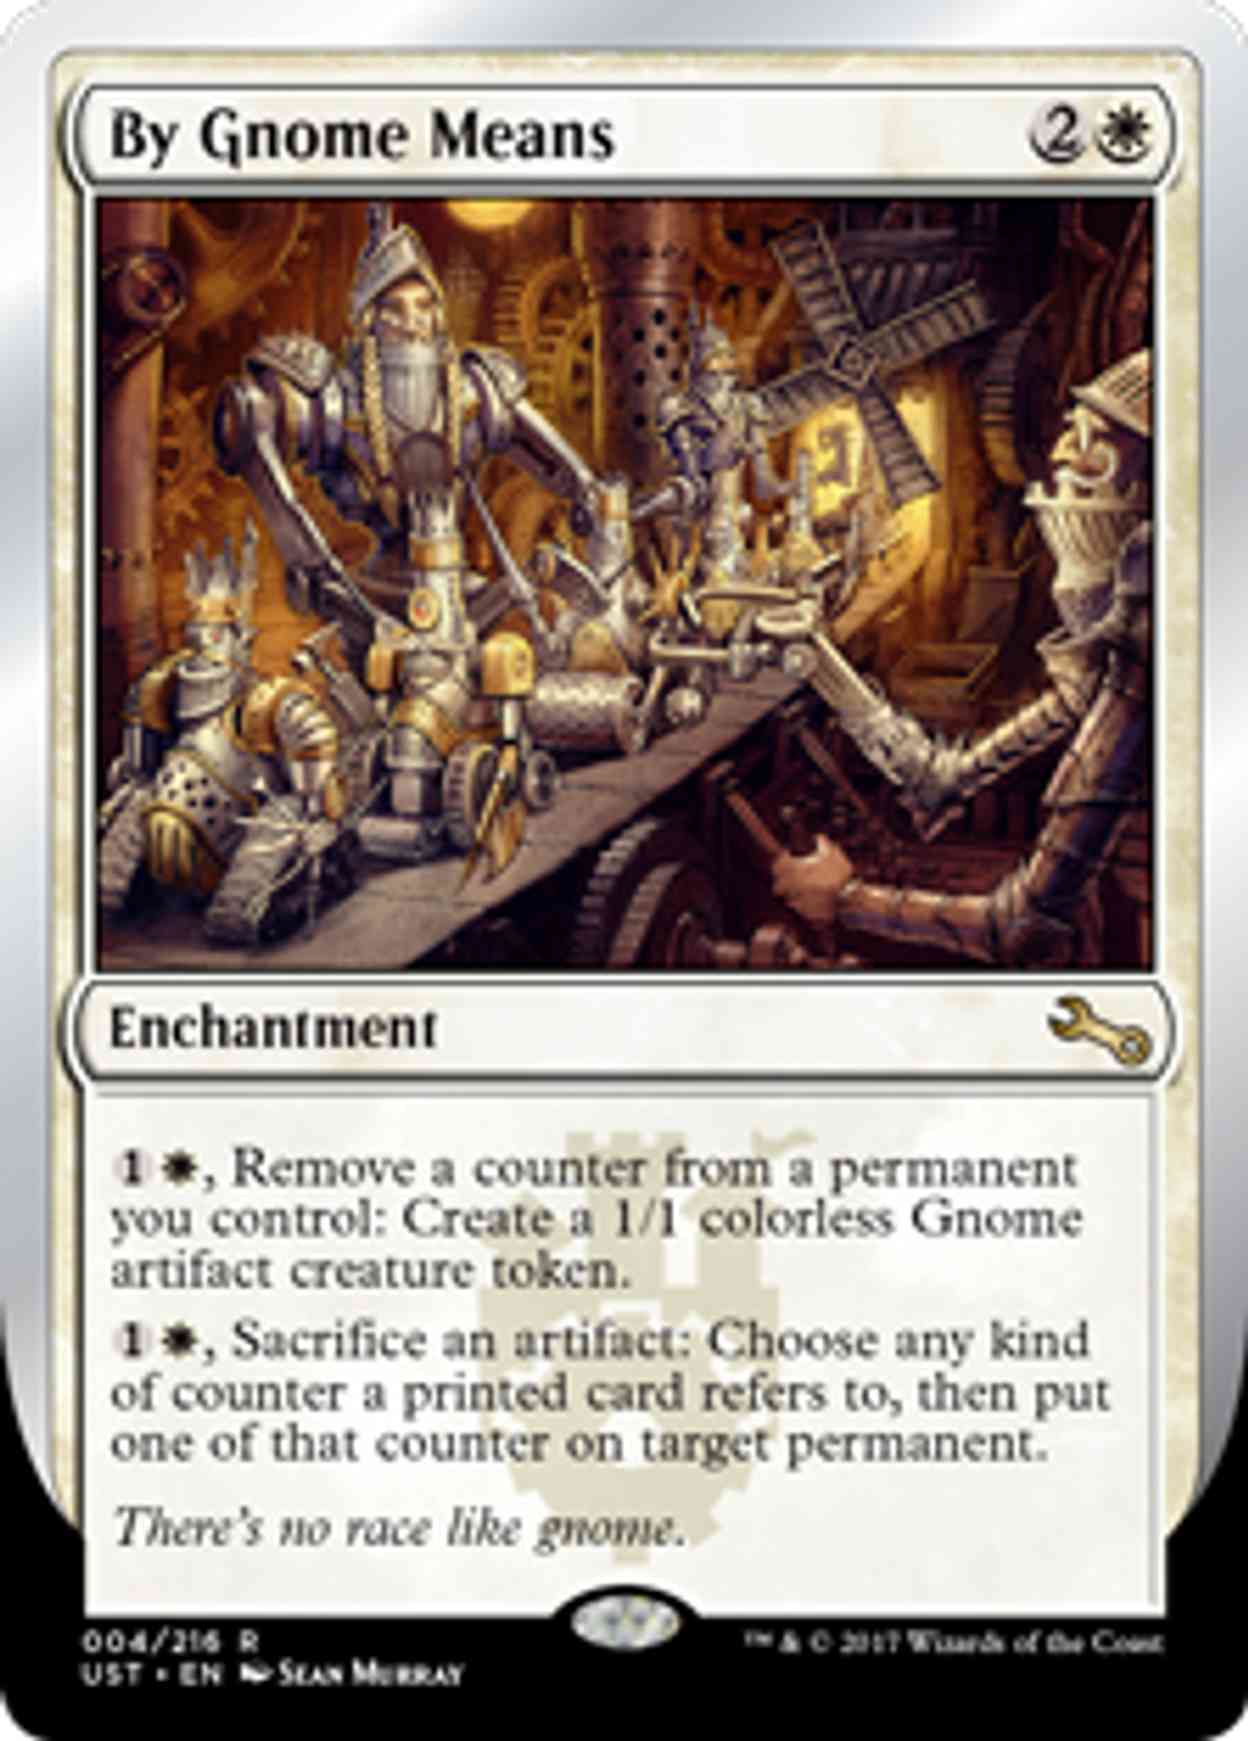 By Gnome Means magic card front